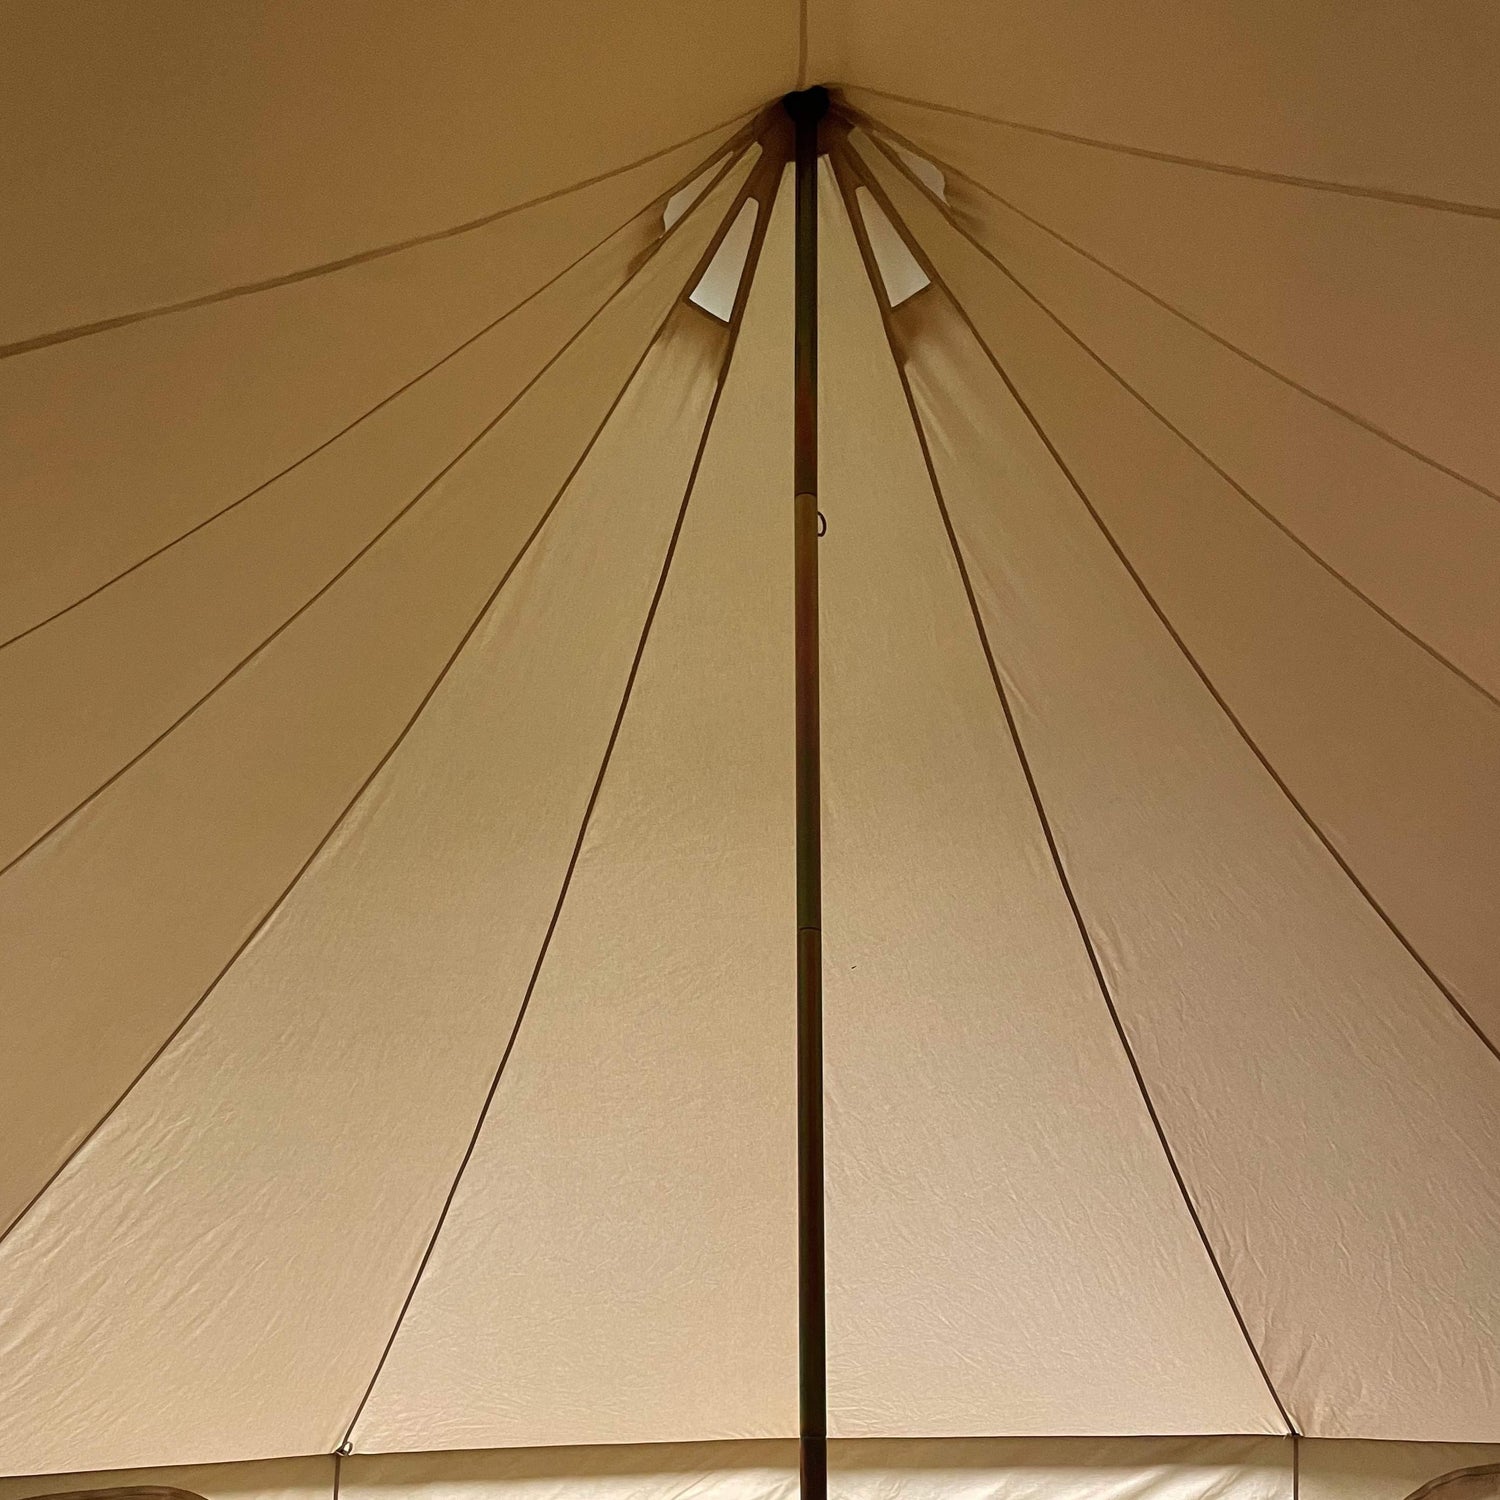 5m Bell Tent Fireproof With Stove Hole &amp; Flap - Bell Tent Sussex